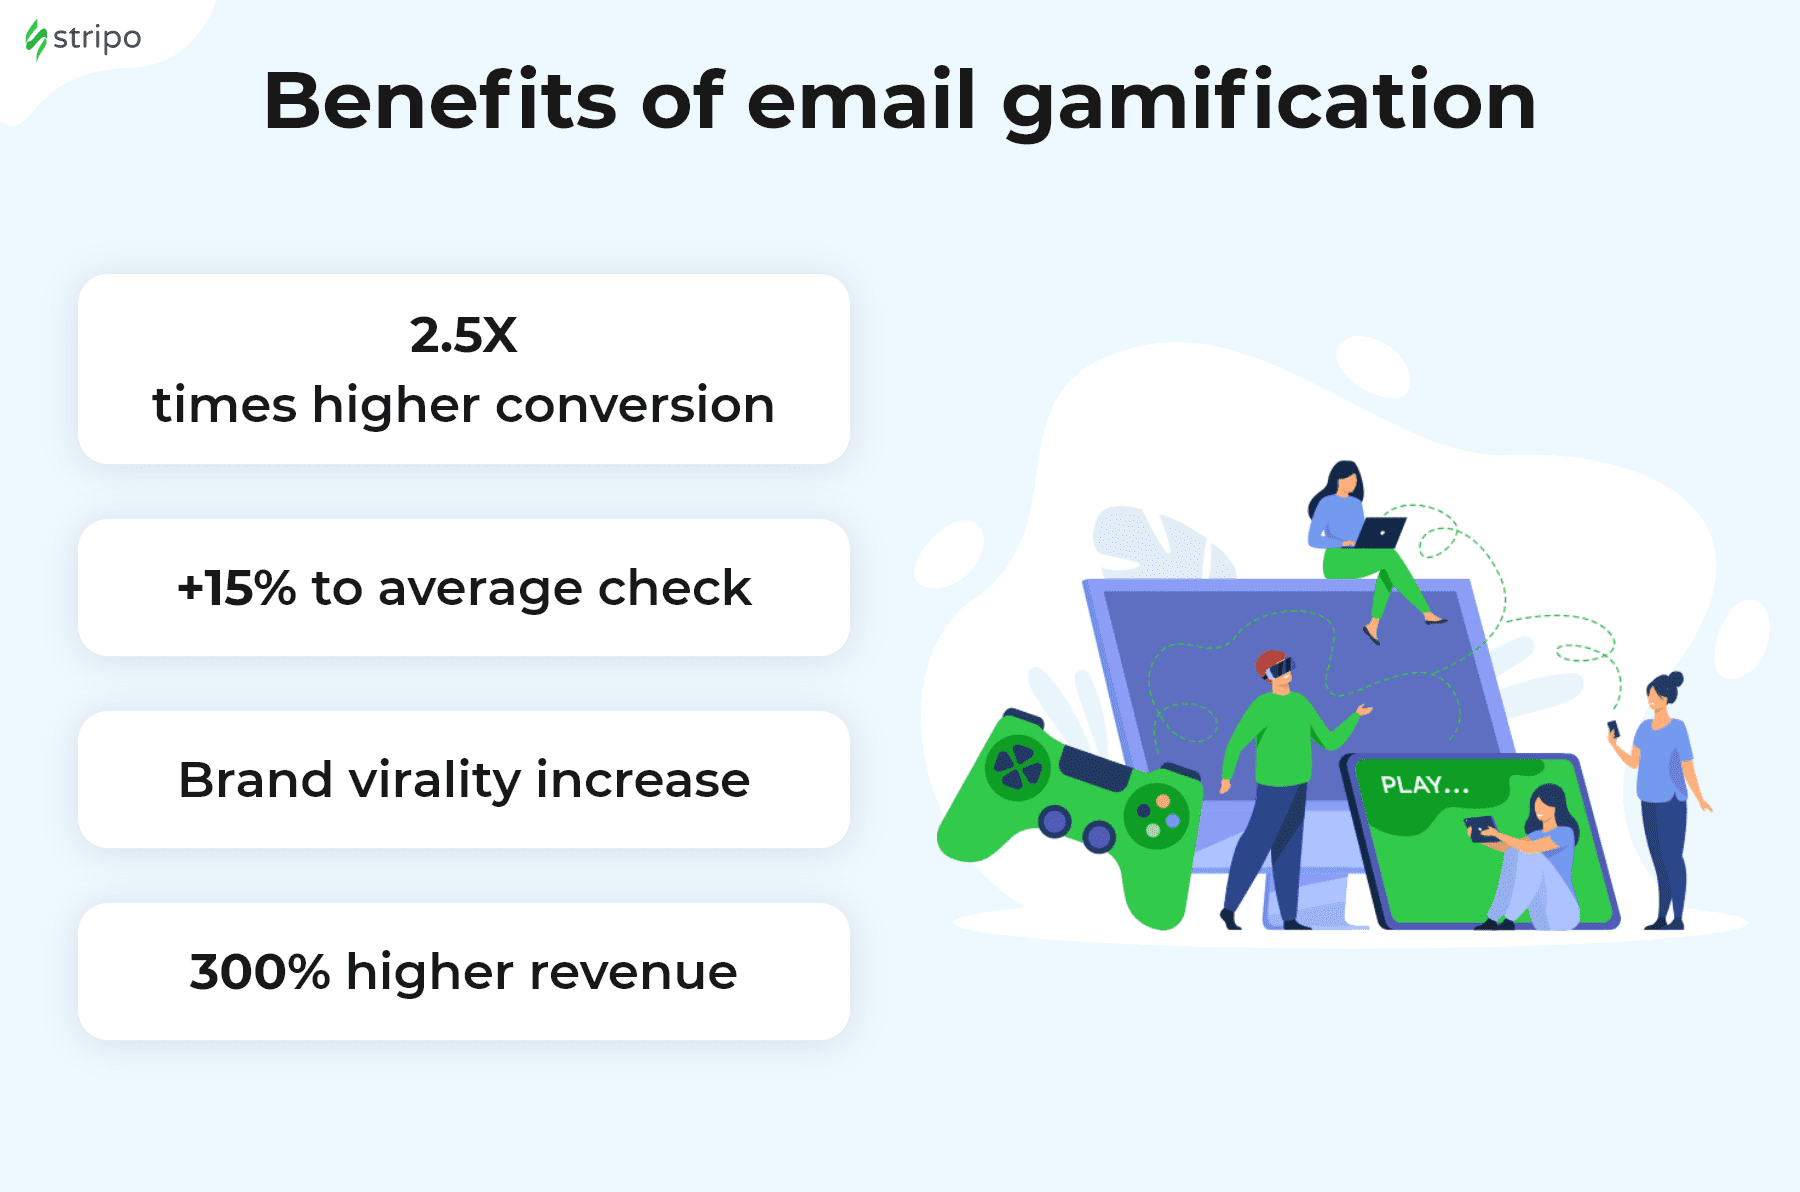 Benefits of Email Gamification for Digital Marketers